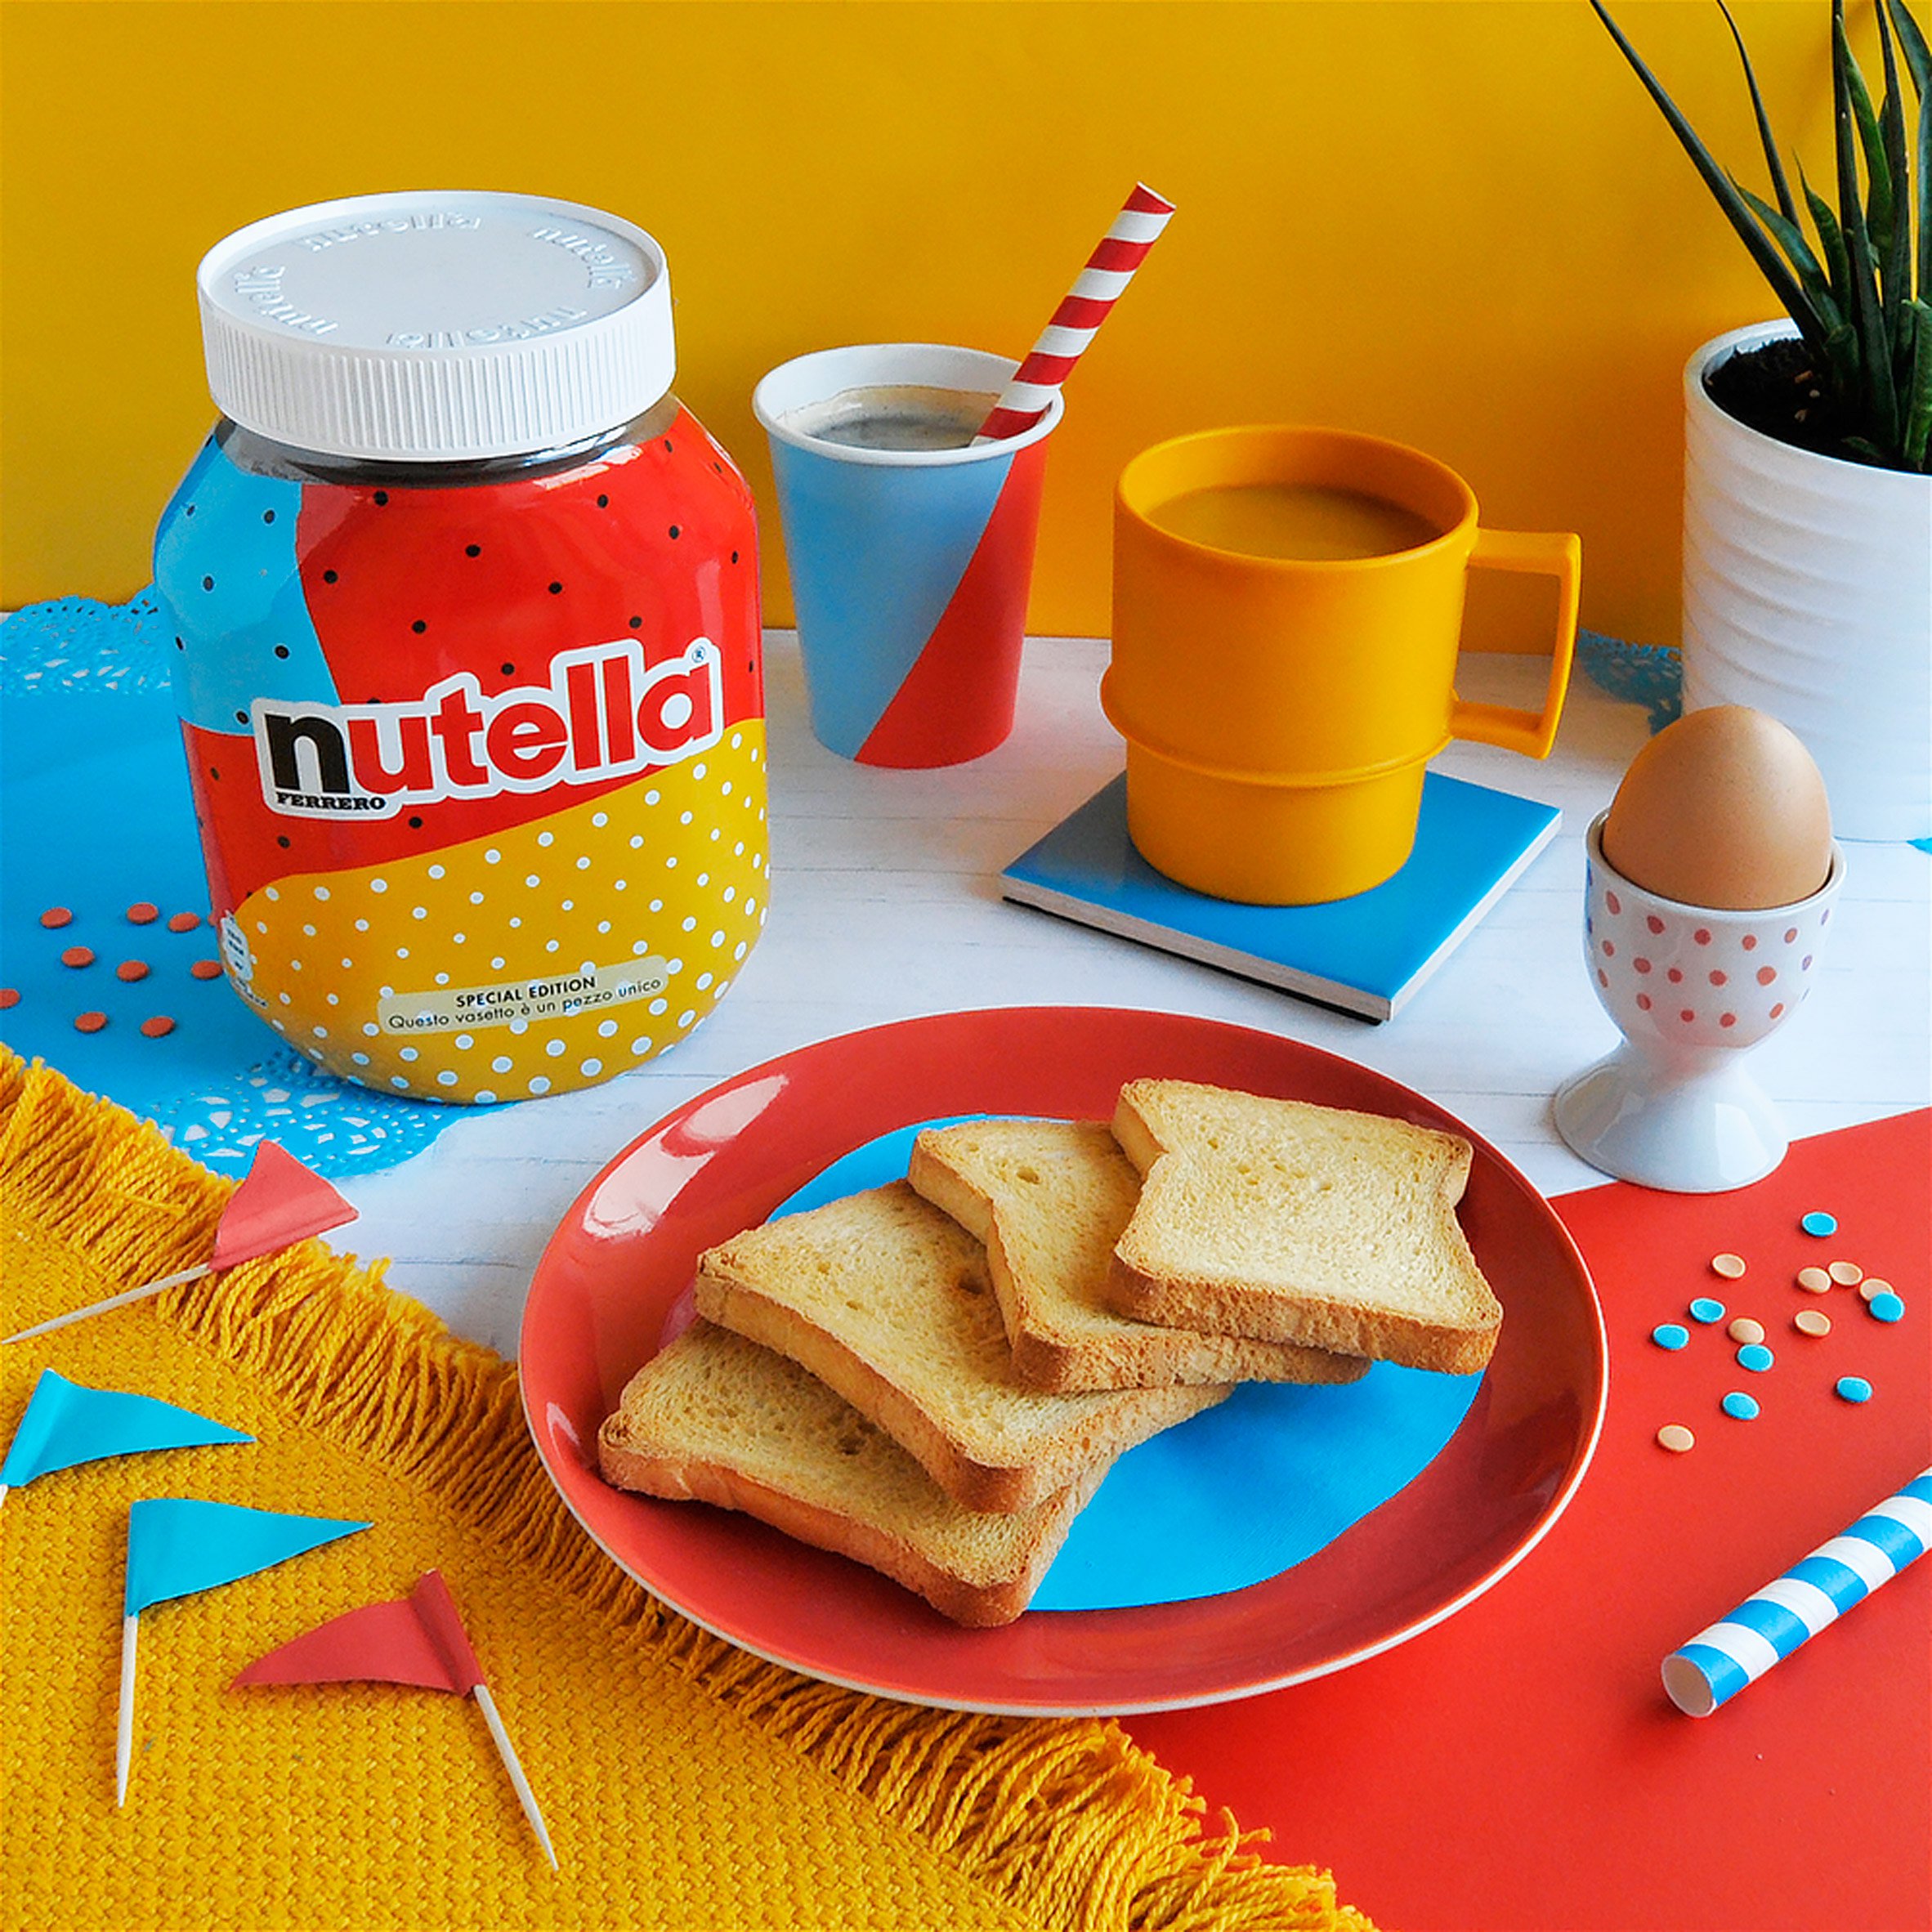 nutella-unica-packaging-design-products-_dezeen_2364_col_0